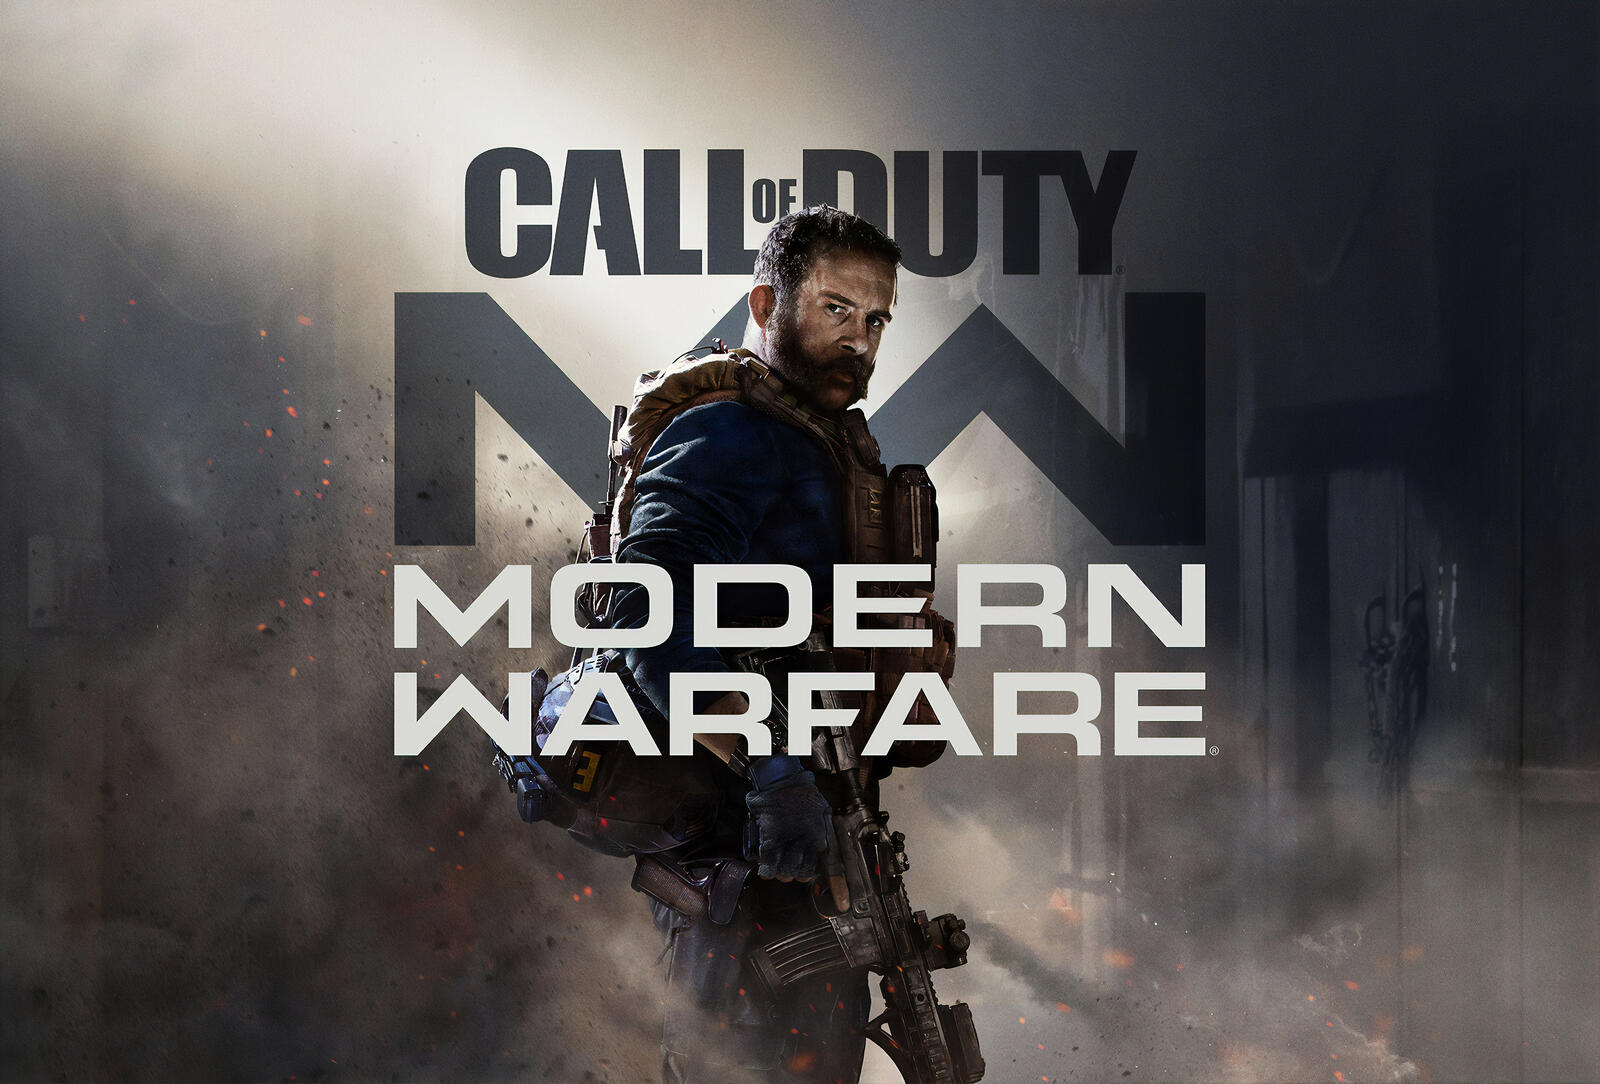 Wallpapers call of duty games computer games on the desktop